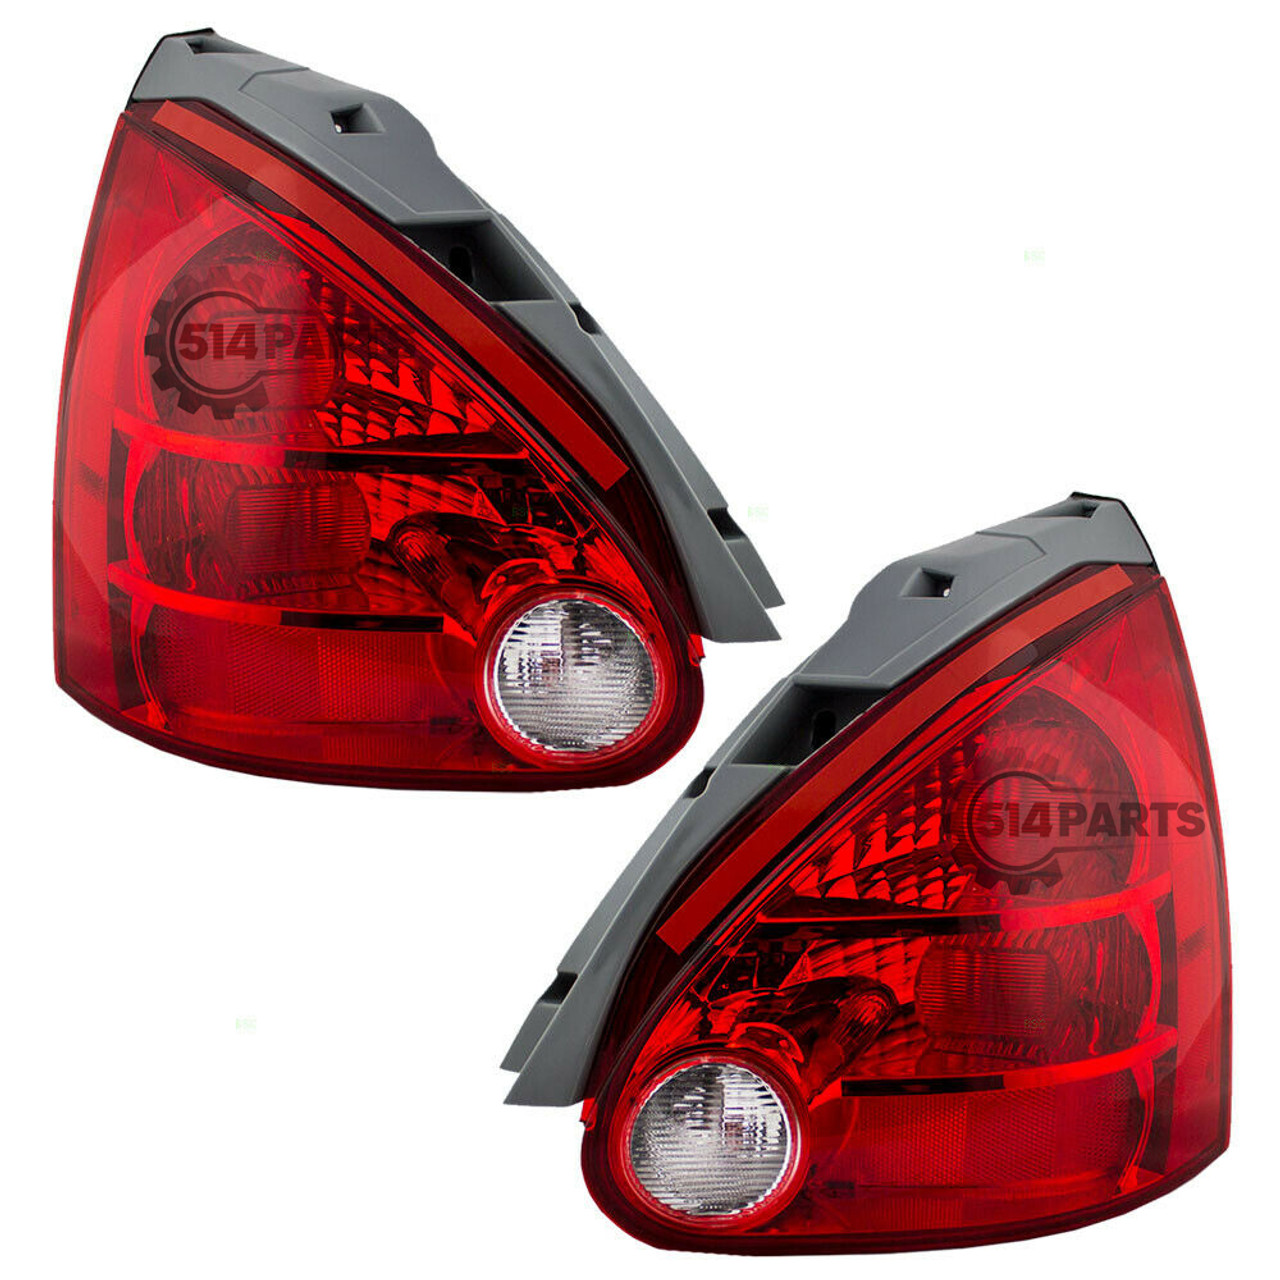 2004 - 2008 NISSAN MAXIMA TAIL LIGHTS High Quality - PHARES ARRIERE Haute Qualite